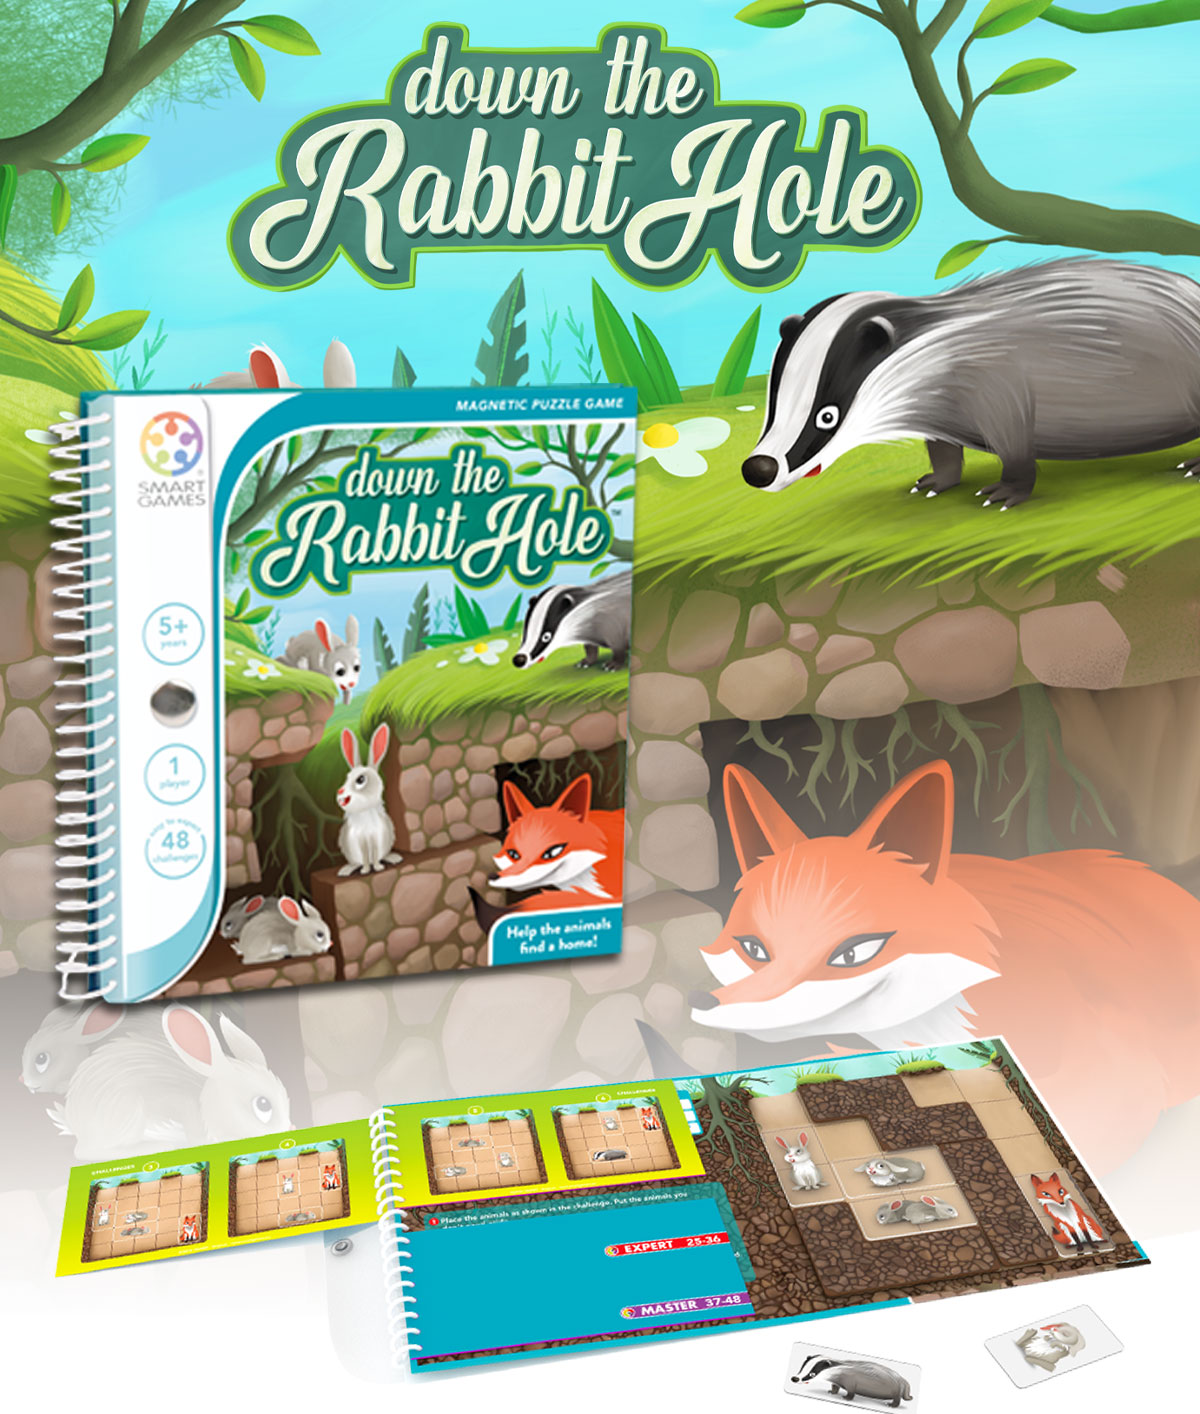 Down the Rabbit Hole - SmartGames